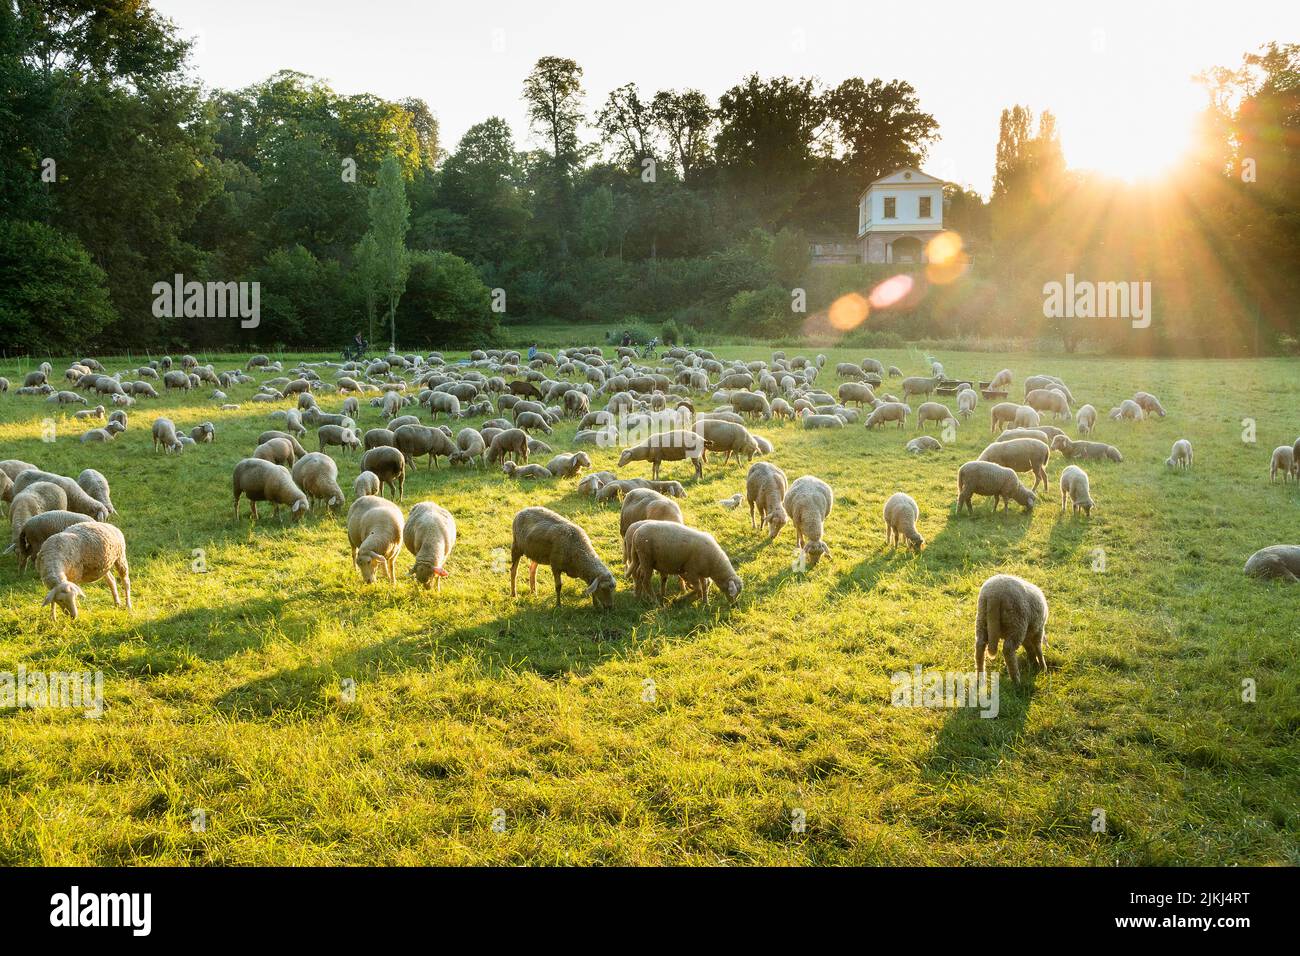 Weimar, Thuringia, park at the river Ilm, flock of sheep in backlight, Roman house in background Stock Photo